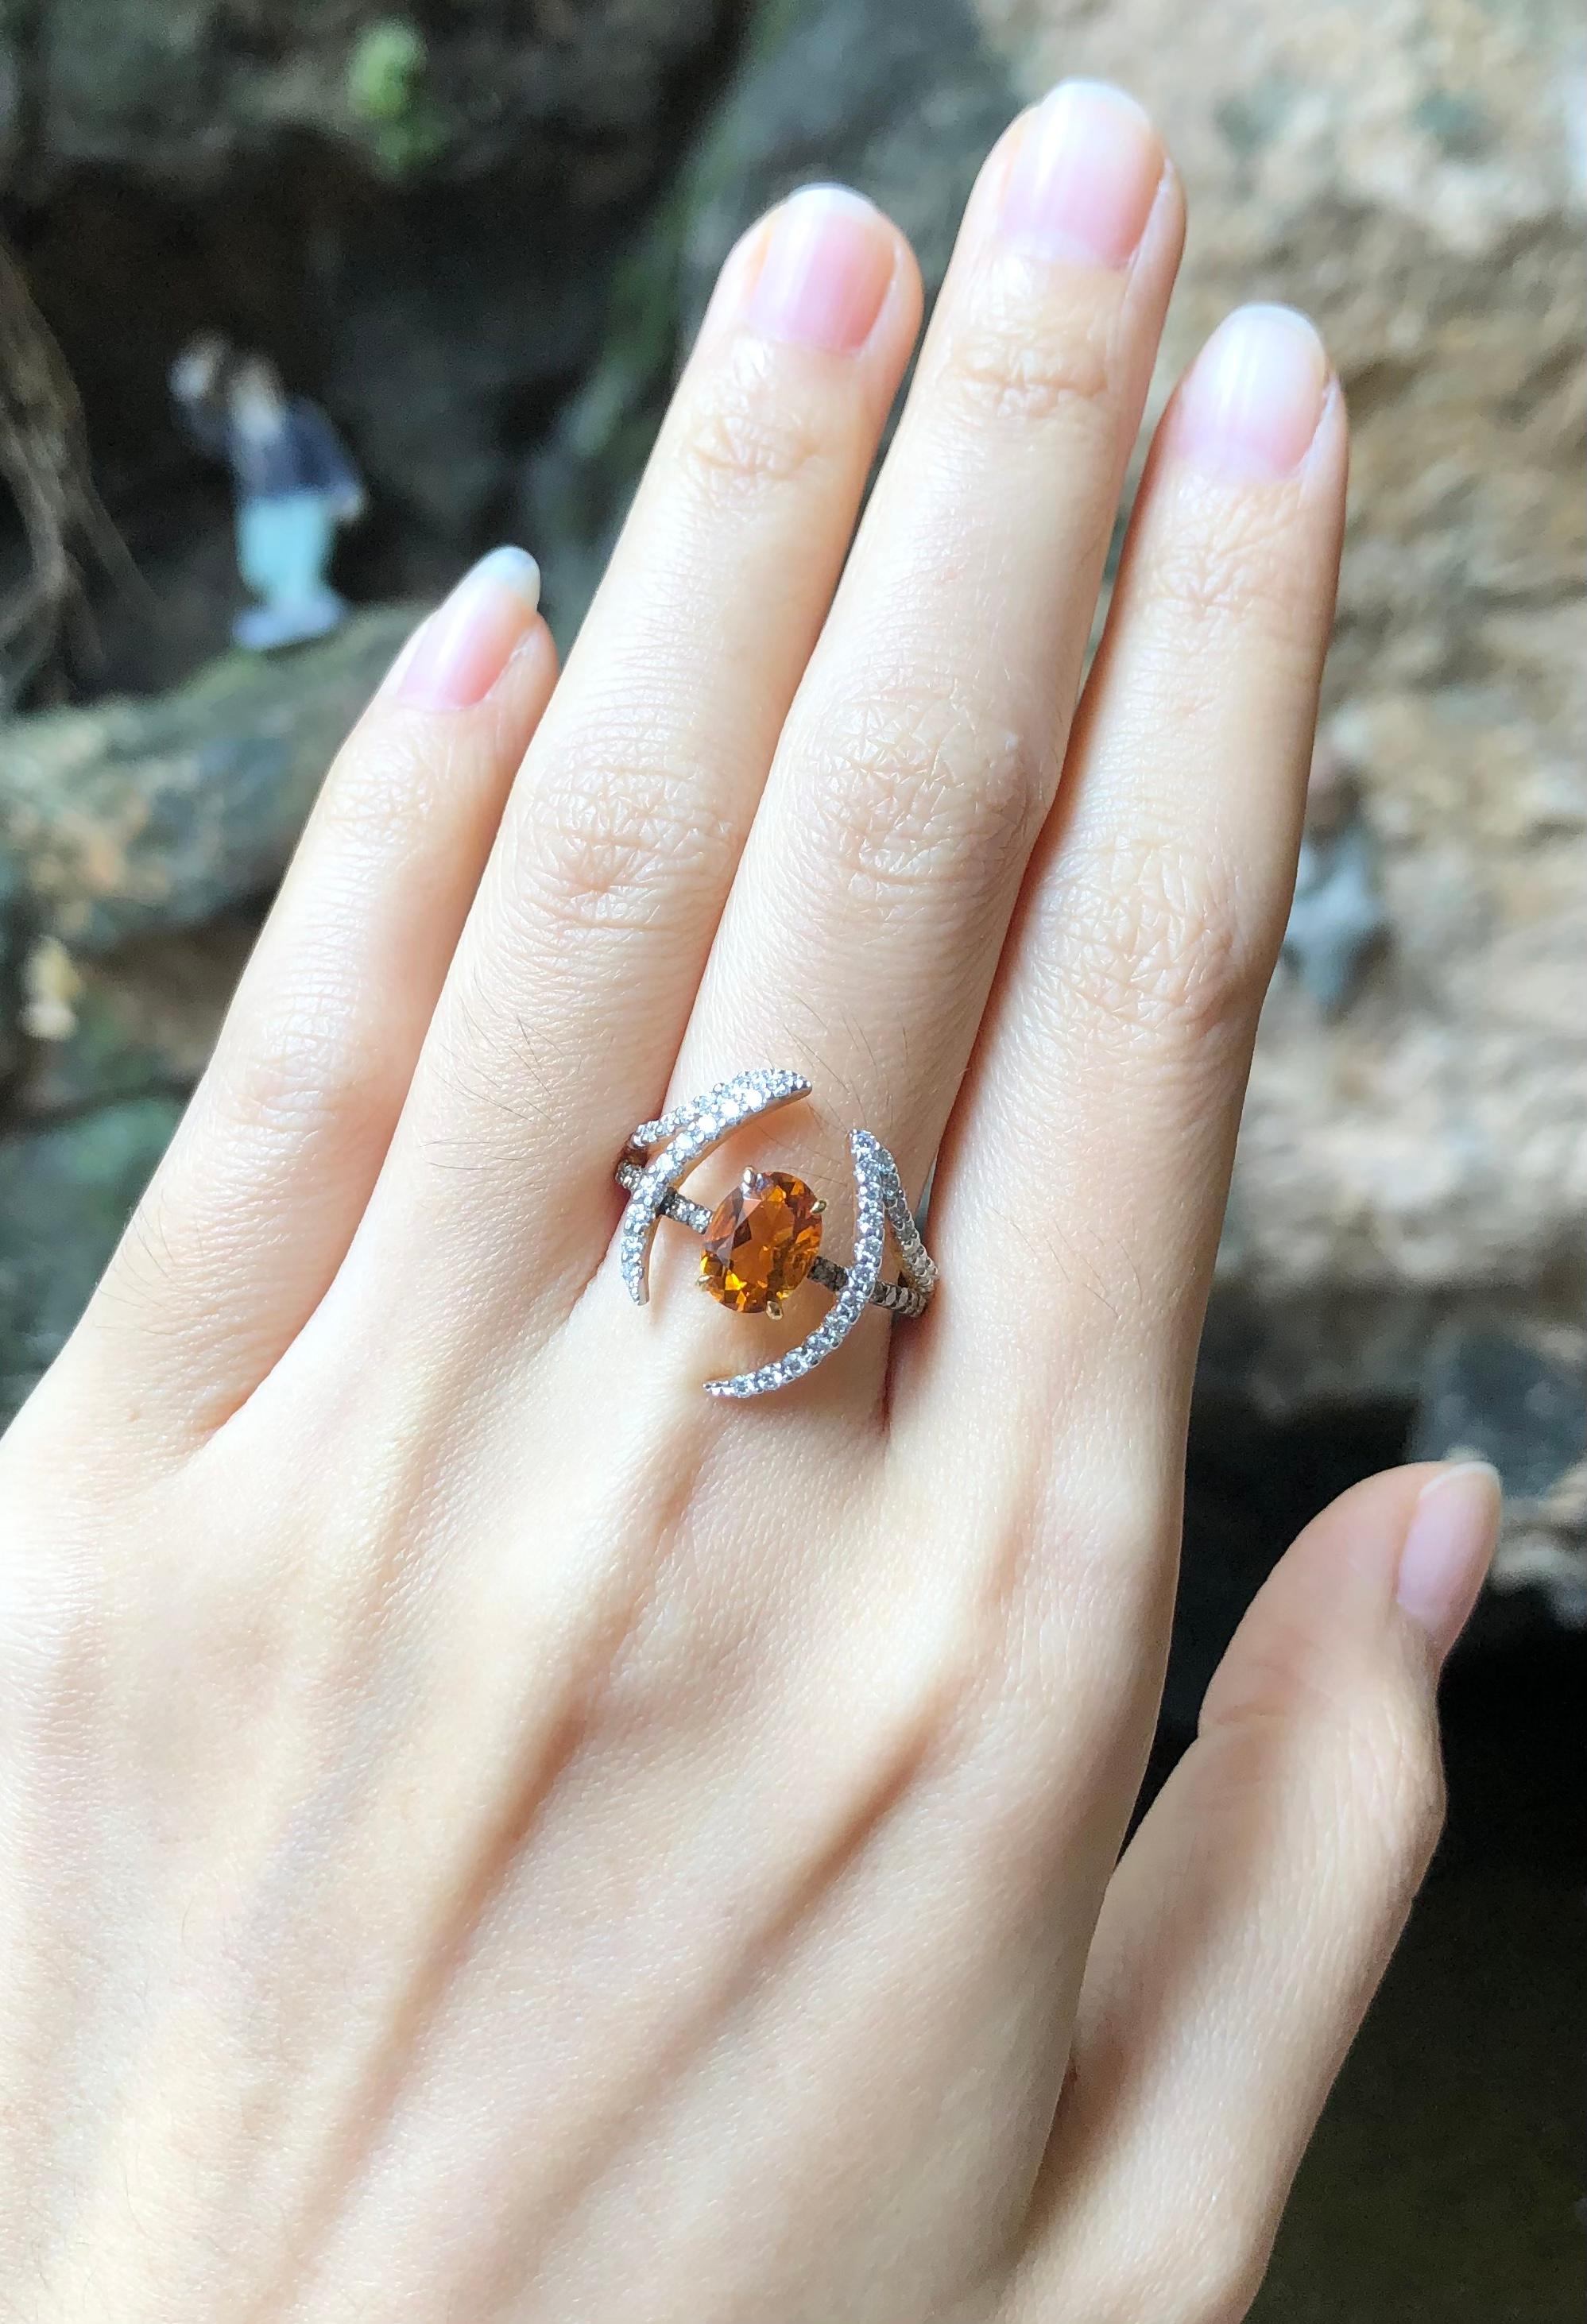 Citrine 1.09 carats with Brown Diamond 0.15 carat and Diamond 0.37 carat Ring set in 18 Karat Gold Settings

Width:  2.0 cm 
Length: 1.9 cm
Ring Size: 54
Total Weight: 4.43 grams

Citrine
Width:  0.5 cm 
Length: 0.7 cm

